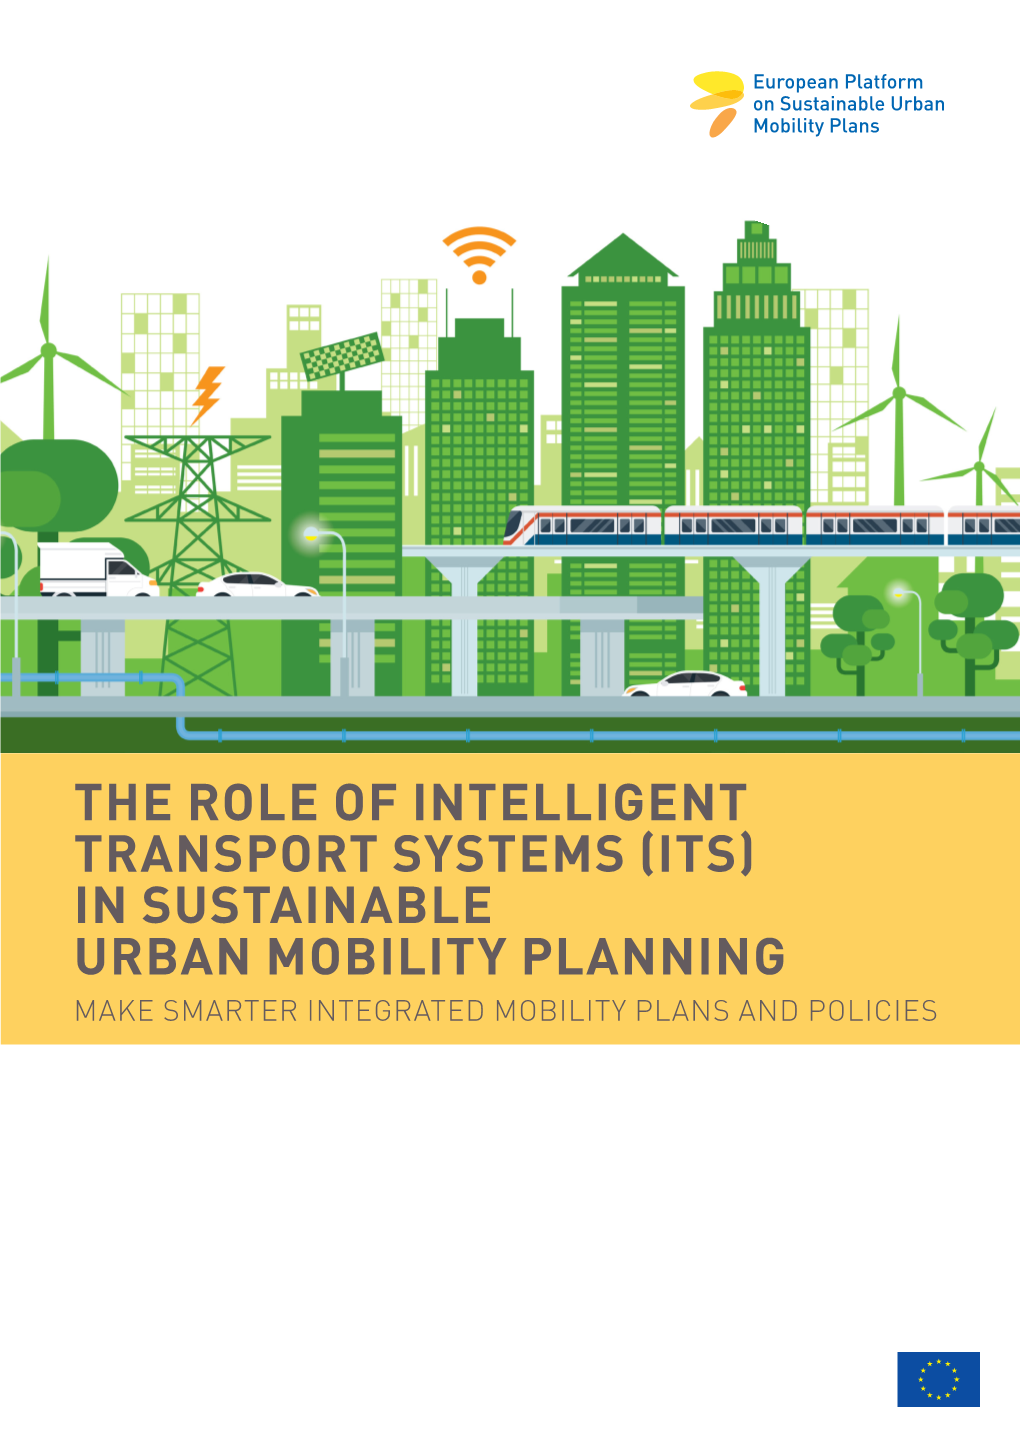 THE ROLE of INTELLIGENT TRANSPORT SYSTEMS (ITS) in SUSTAINABLE URBAN MOBILITY PLANNING MAKE SMARTER INTEGRATED MOBILITY PLANS and POLICIES Imprint